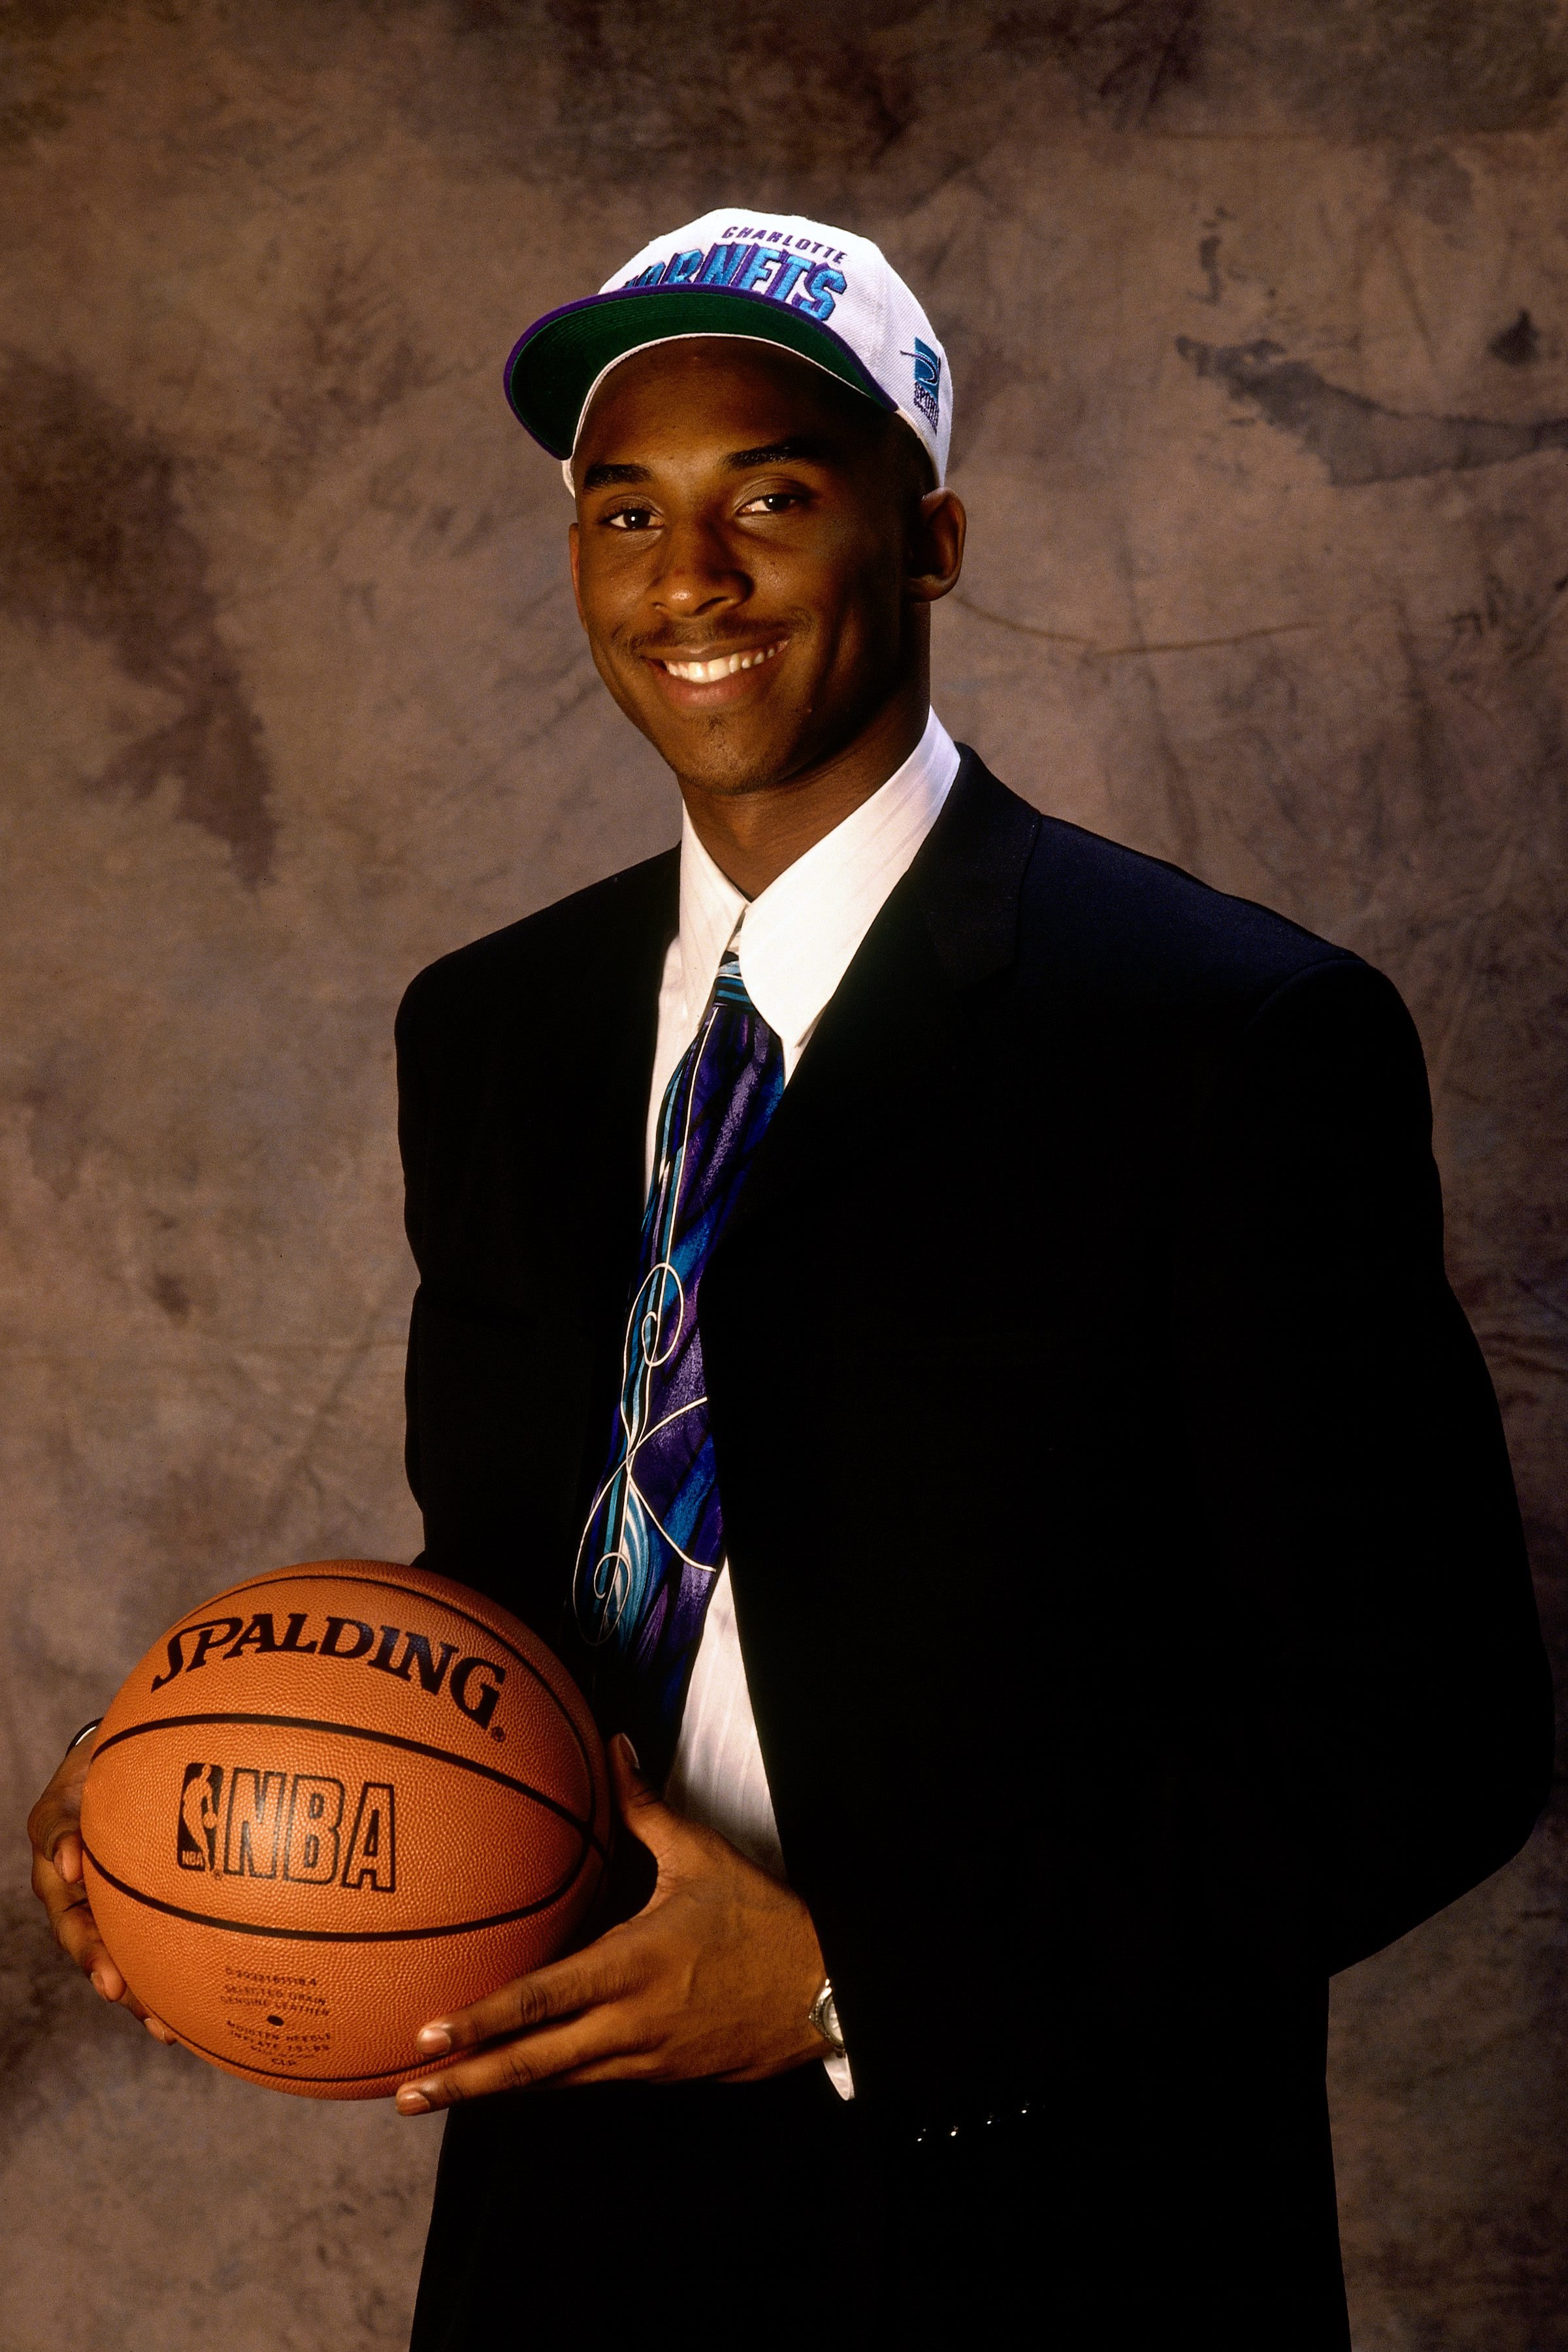 NEW YORK - JUNE 26: Kobe Bryant poses for a portrait after being selected by the Charlotte Hornets in the first round of the 1996 NBA Draft on June 26, 1996 at Madison Square Garden in New York, New York. NOTE TO USER: User expressly acknowledges that, by downloading and or using this photograph, User is consenting to the terms and conditions of the Getty Images License agreement. Mandatory Copyright Notice: Copyright 1996 NBAE (Photo by Andy Hayt/NBAE via Getty Images)